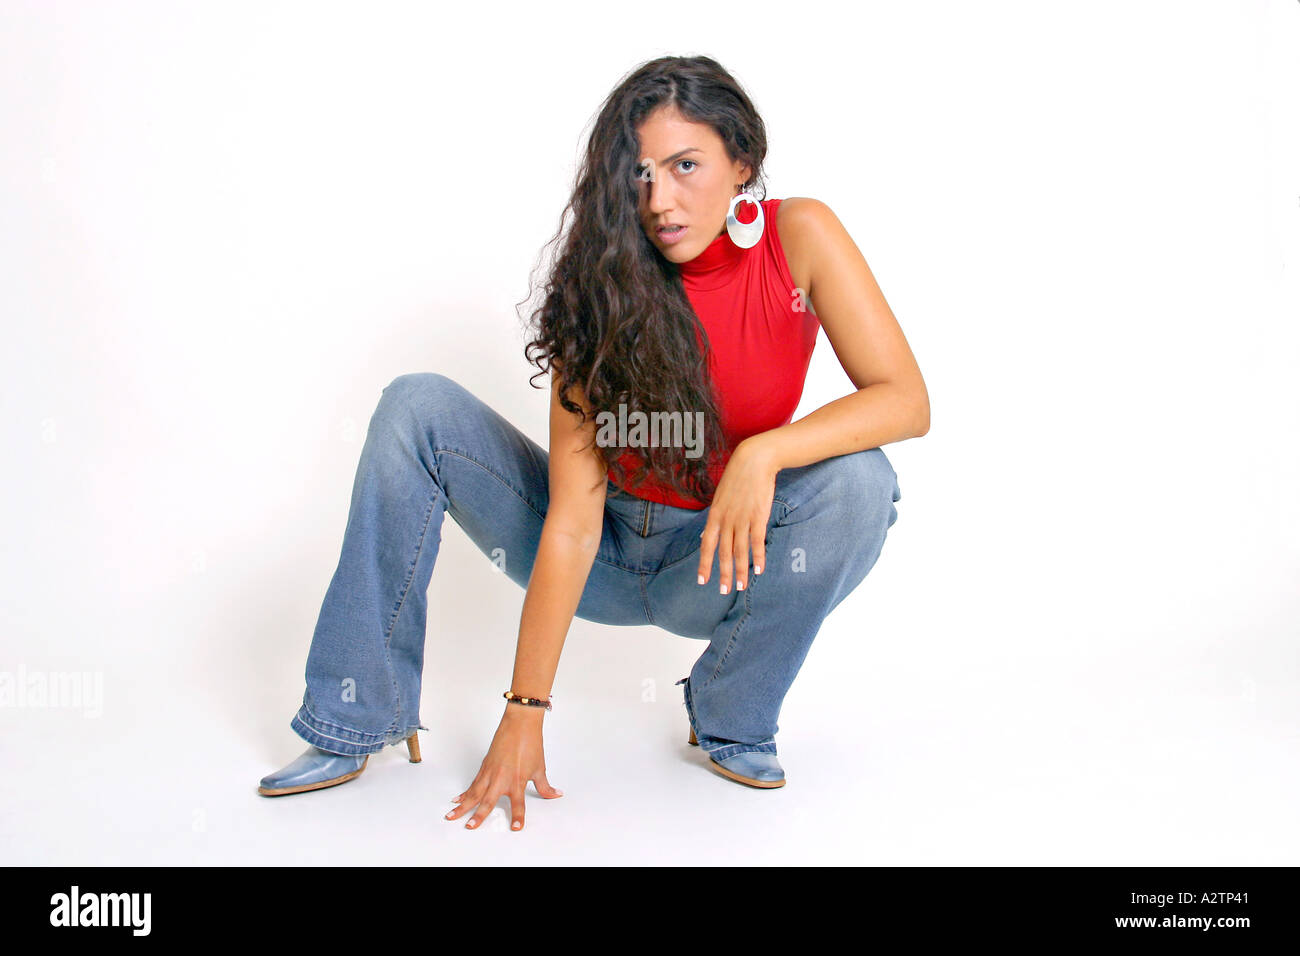 Full shot of Spanish girl with red top and jeans squatting Stock Photo -  Alamy